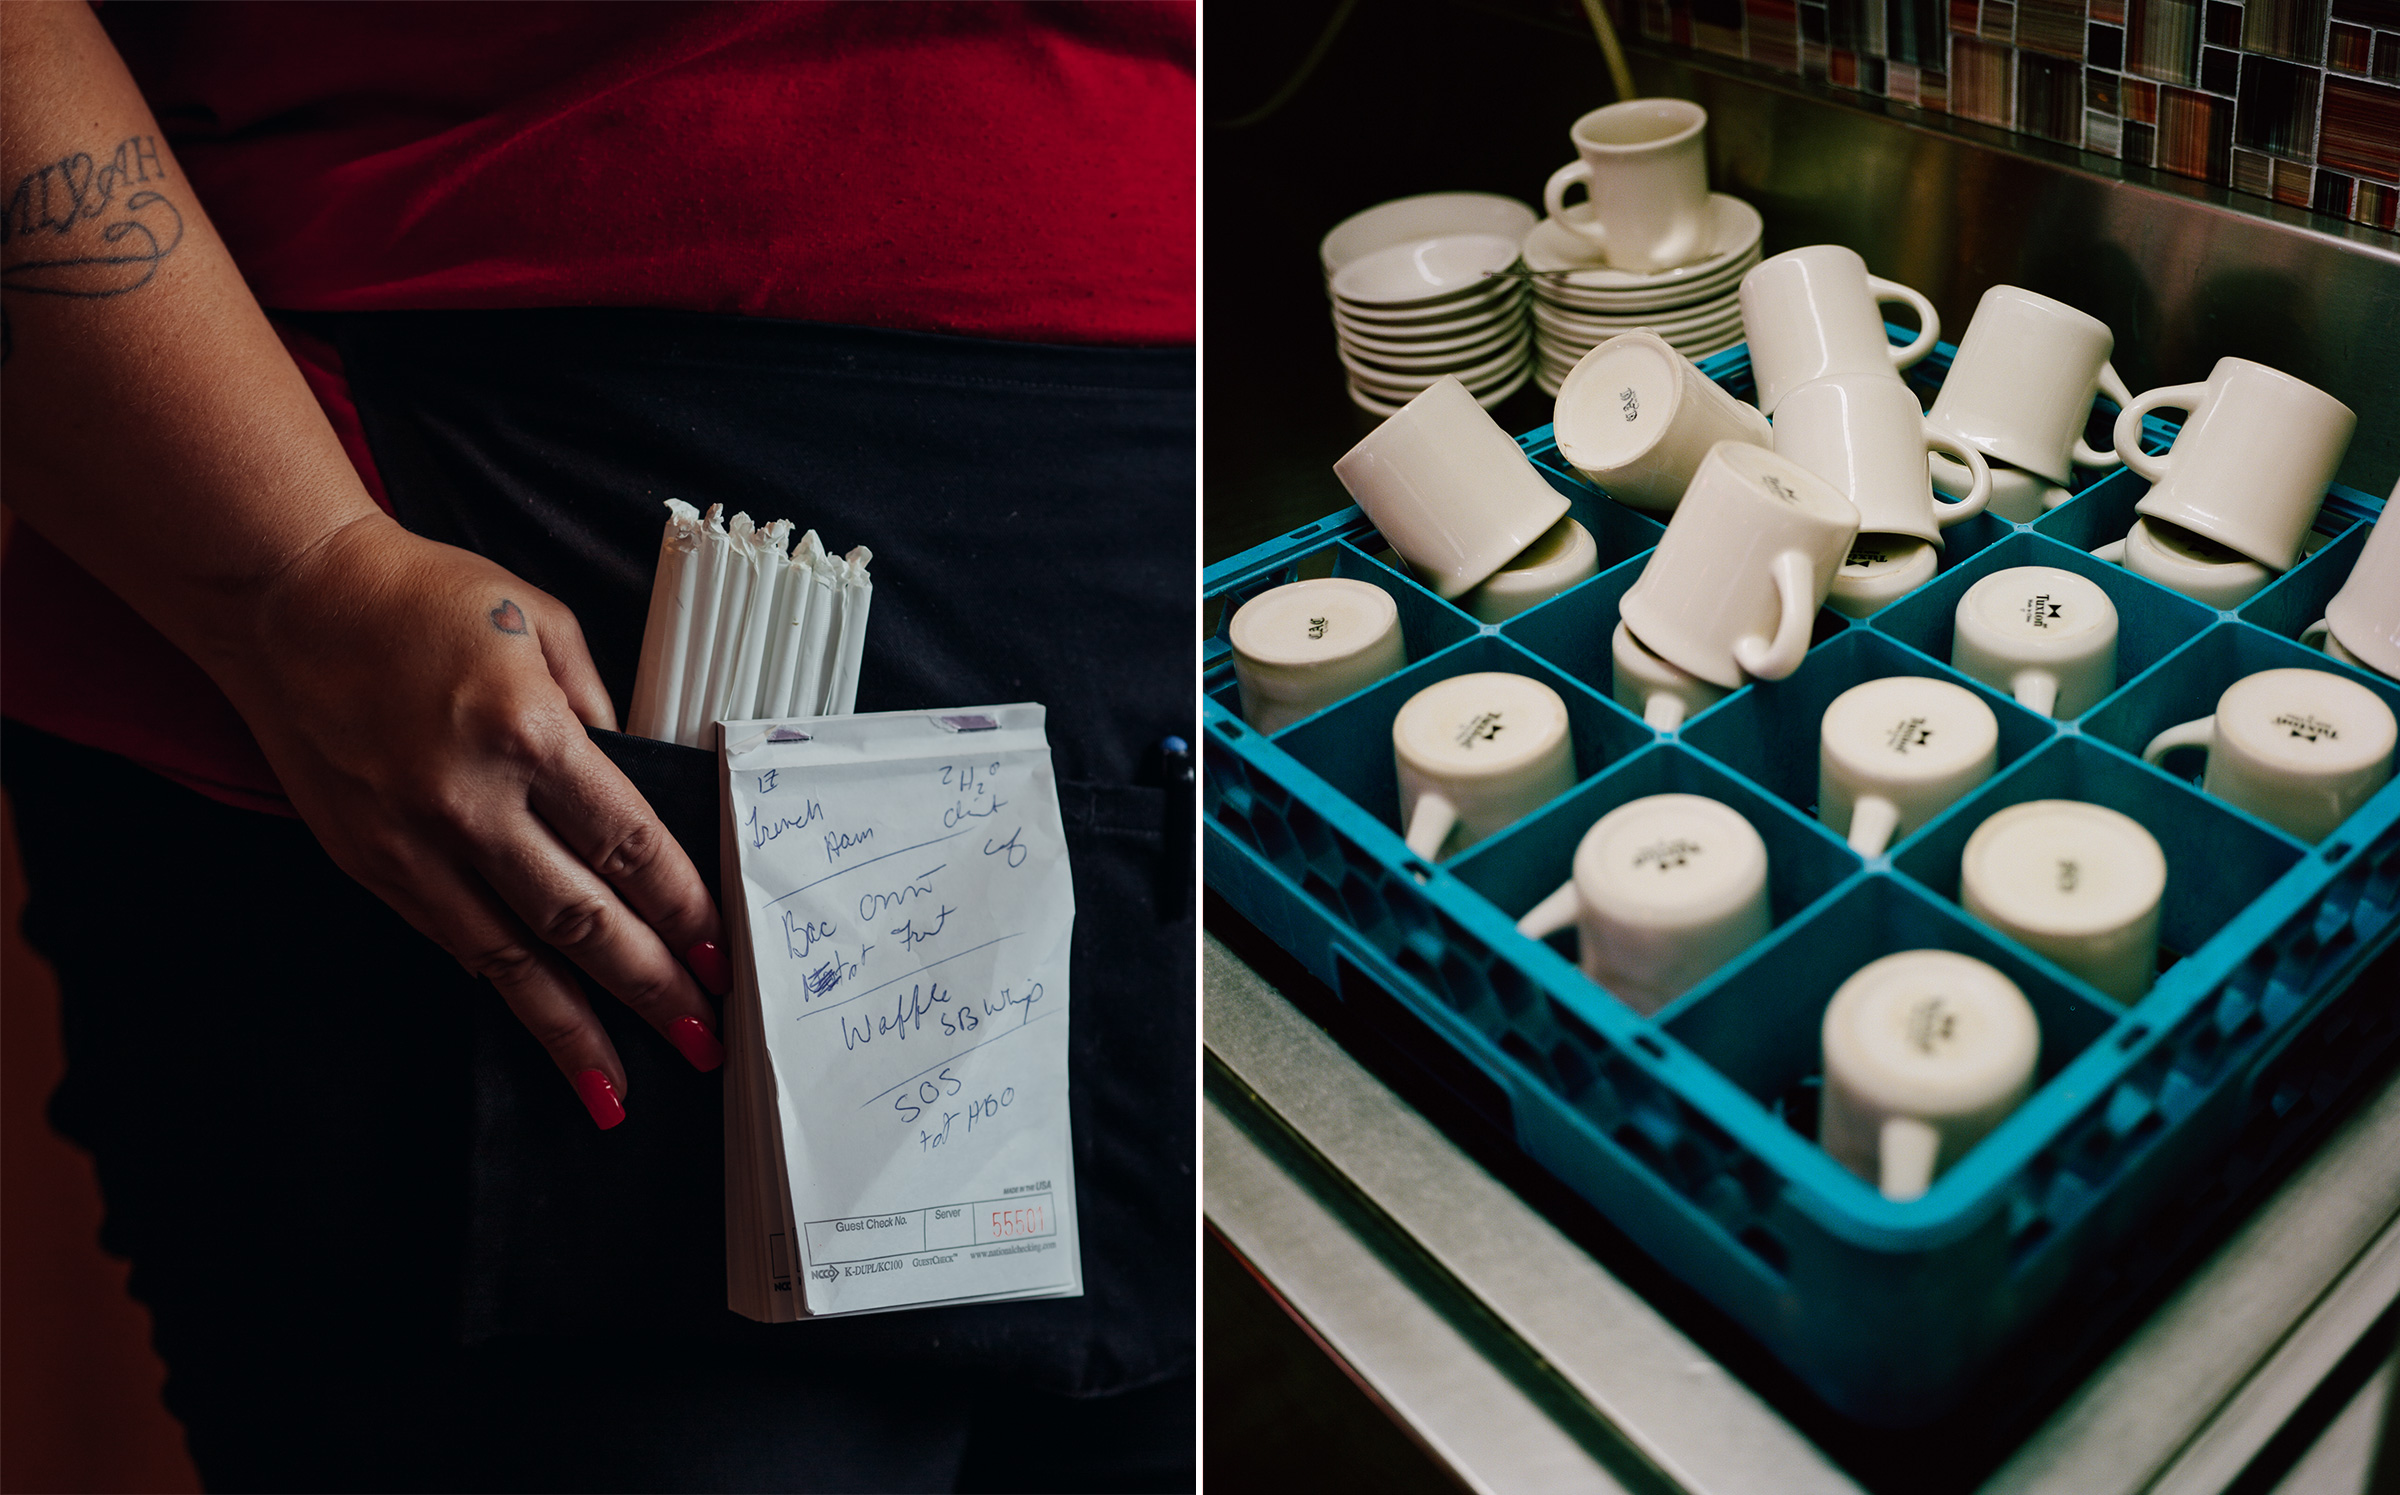 Munce works eight-hour shifts at Broad Street Diner for $2.83 an hour; her tips are supposed to get her to $7.25 an hour, but they often don’t. (Sasha Arutyunova for TIME)